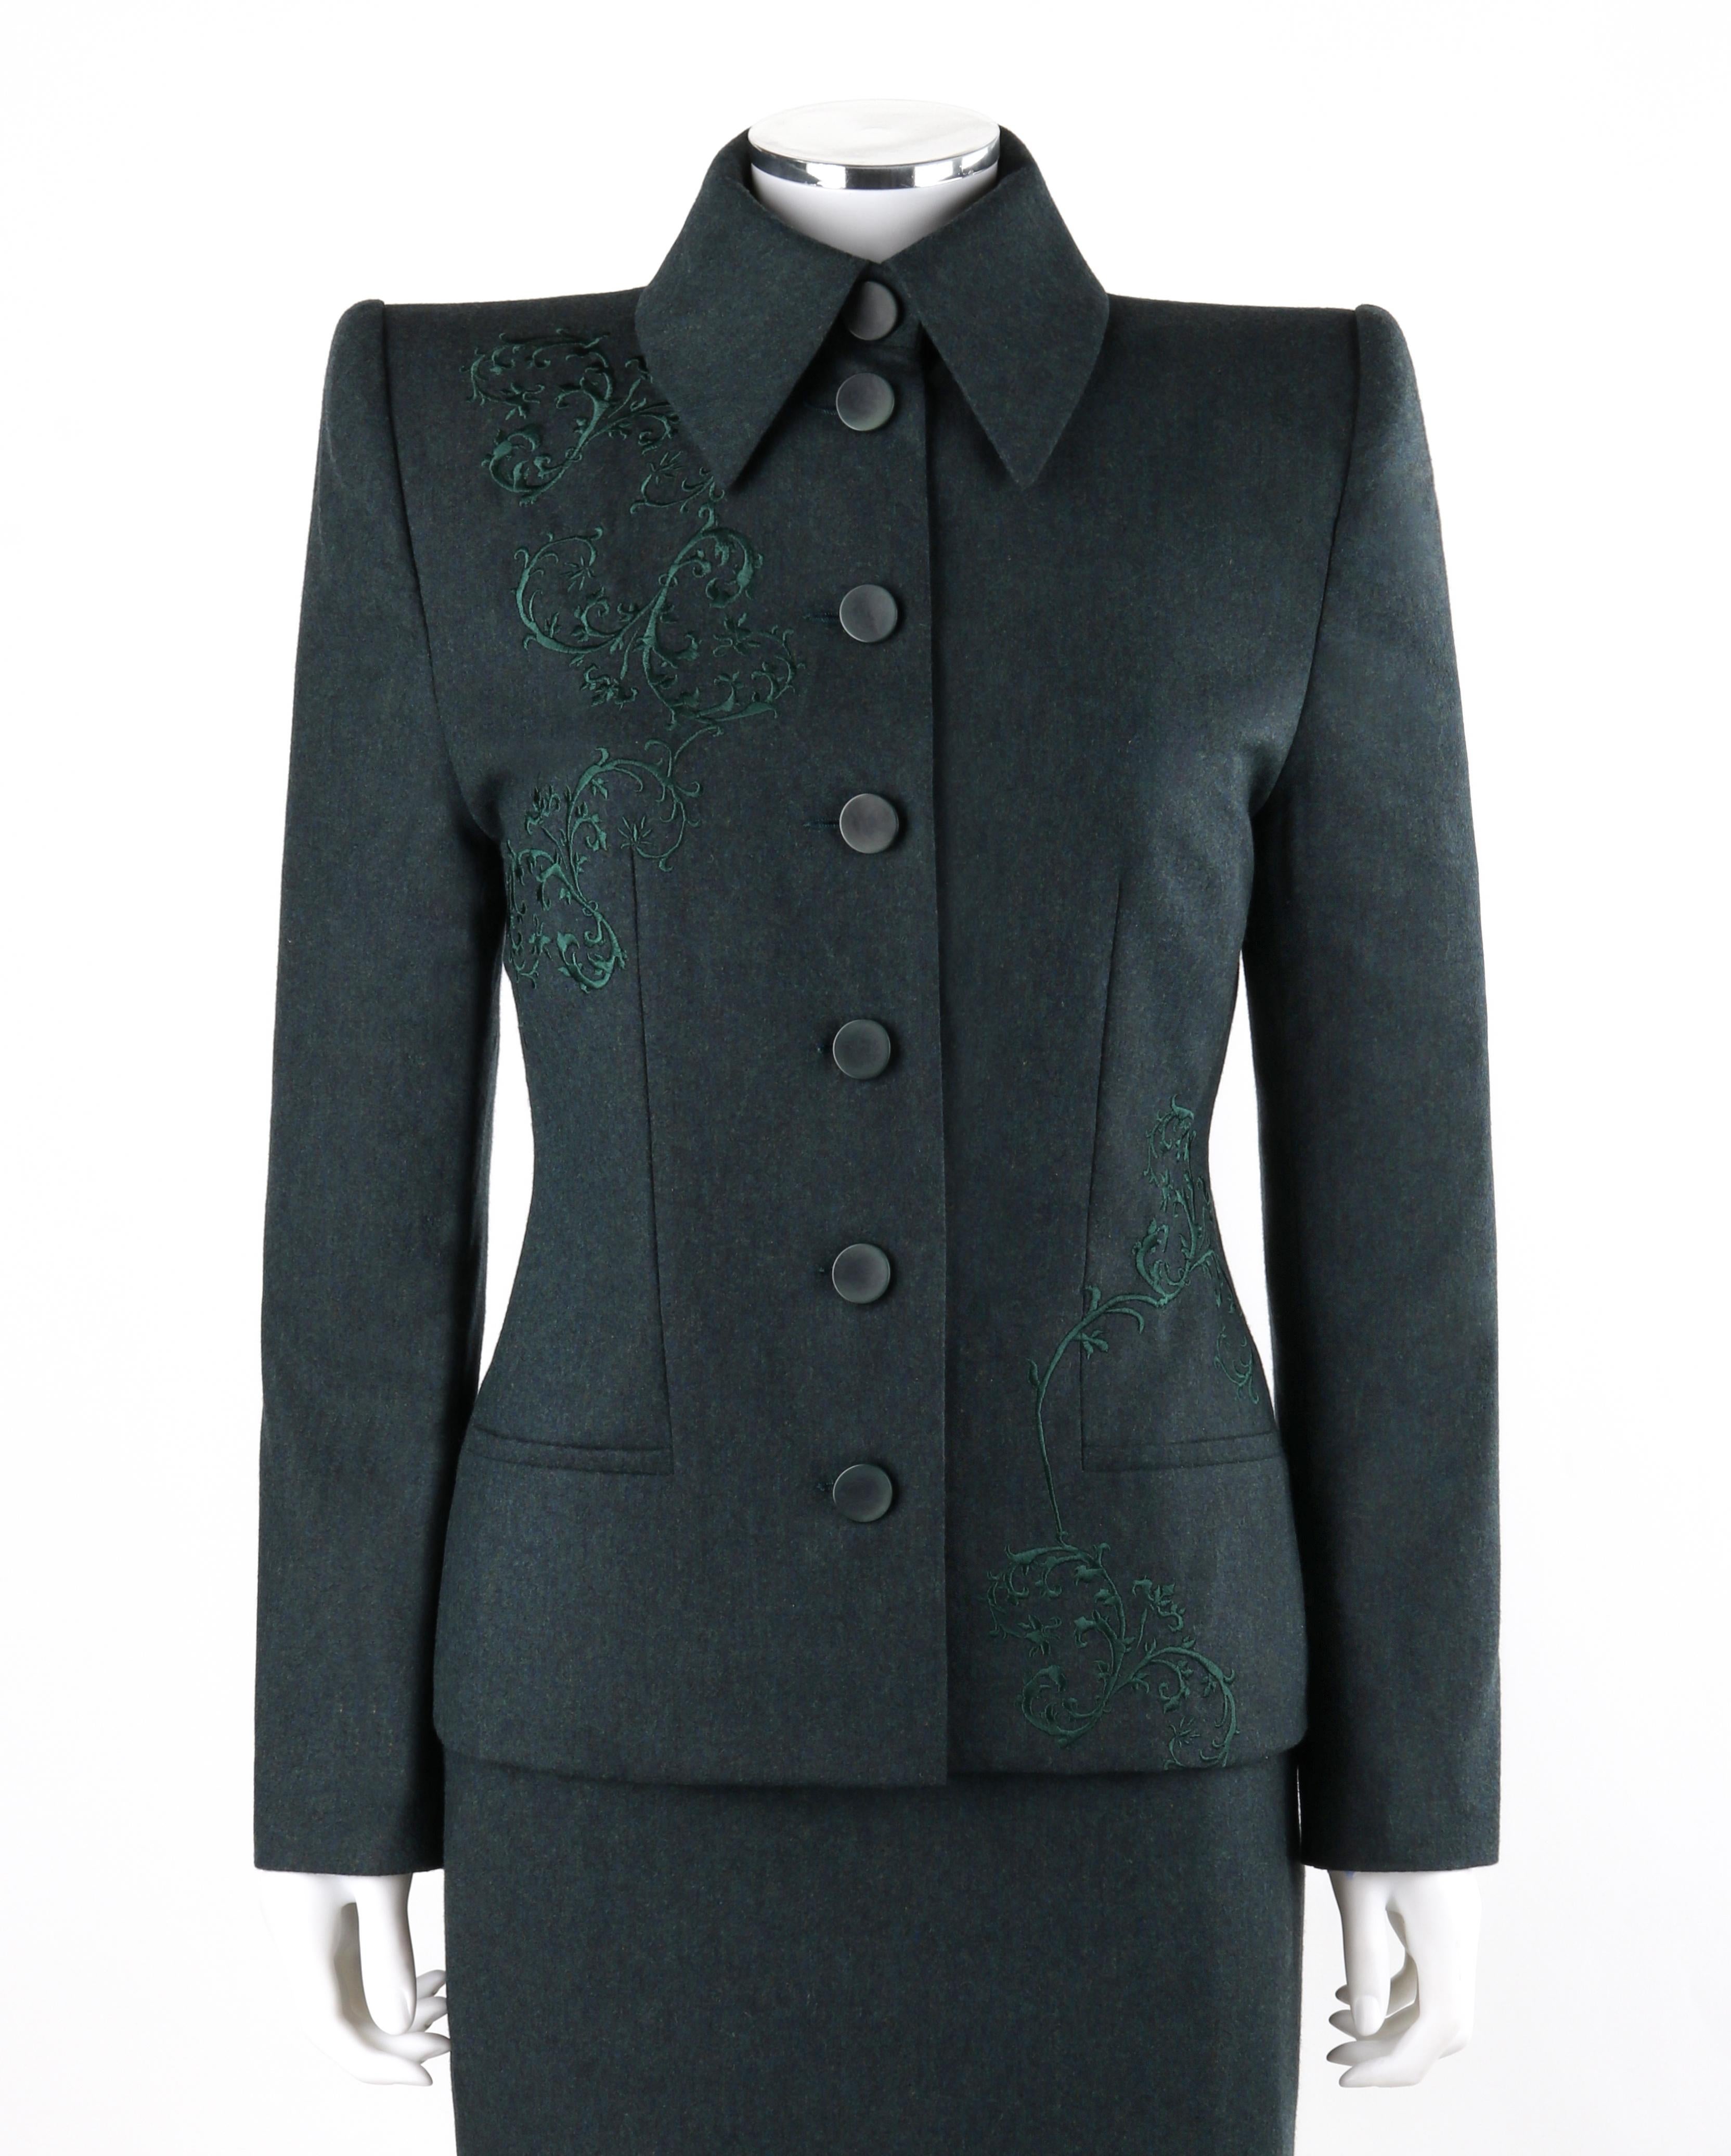 GIVENCHY Couture A/W 1998 ALEXANDER McQUEEN Dark Green Tailored Blazer Skirt Set
 
Brand / Manufacturer: Givenchy Couture
Collection: A/W 1998
Designer: Alexander McQueen
Style: Blazer jacket; fitted sheath skirt
Color(s): Shades of green
Lined: